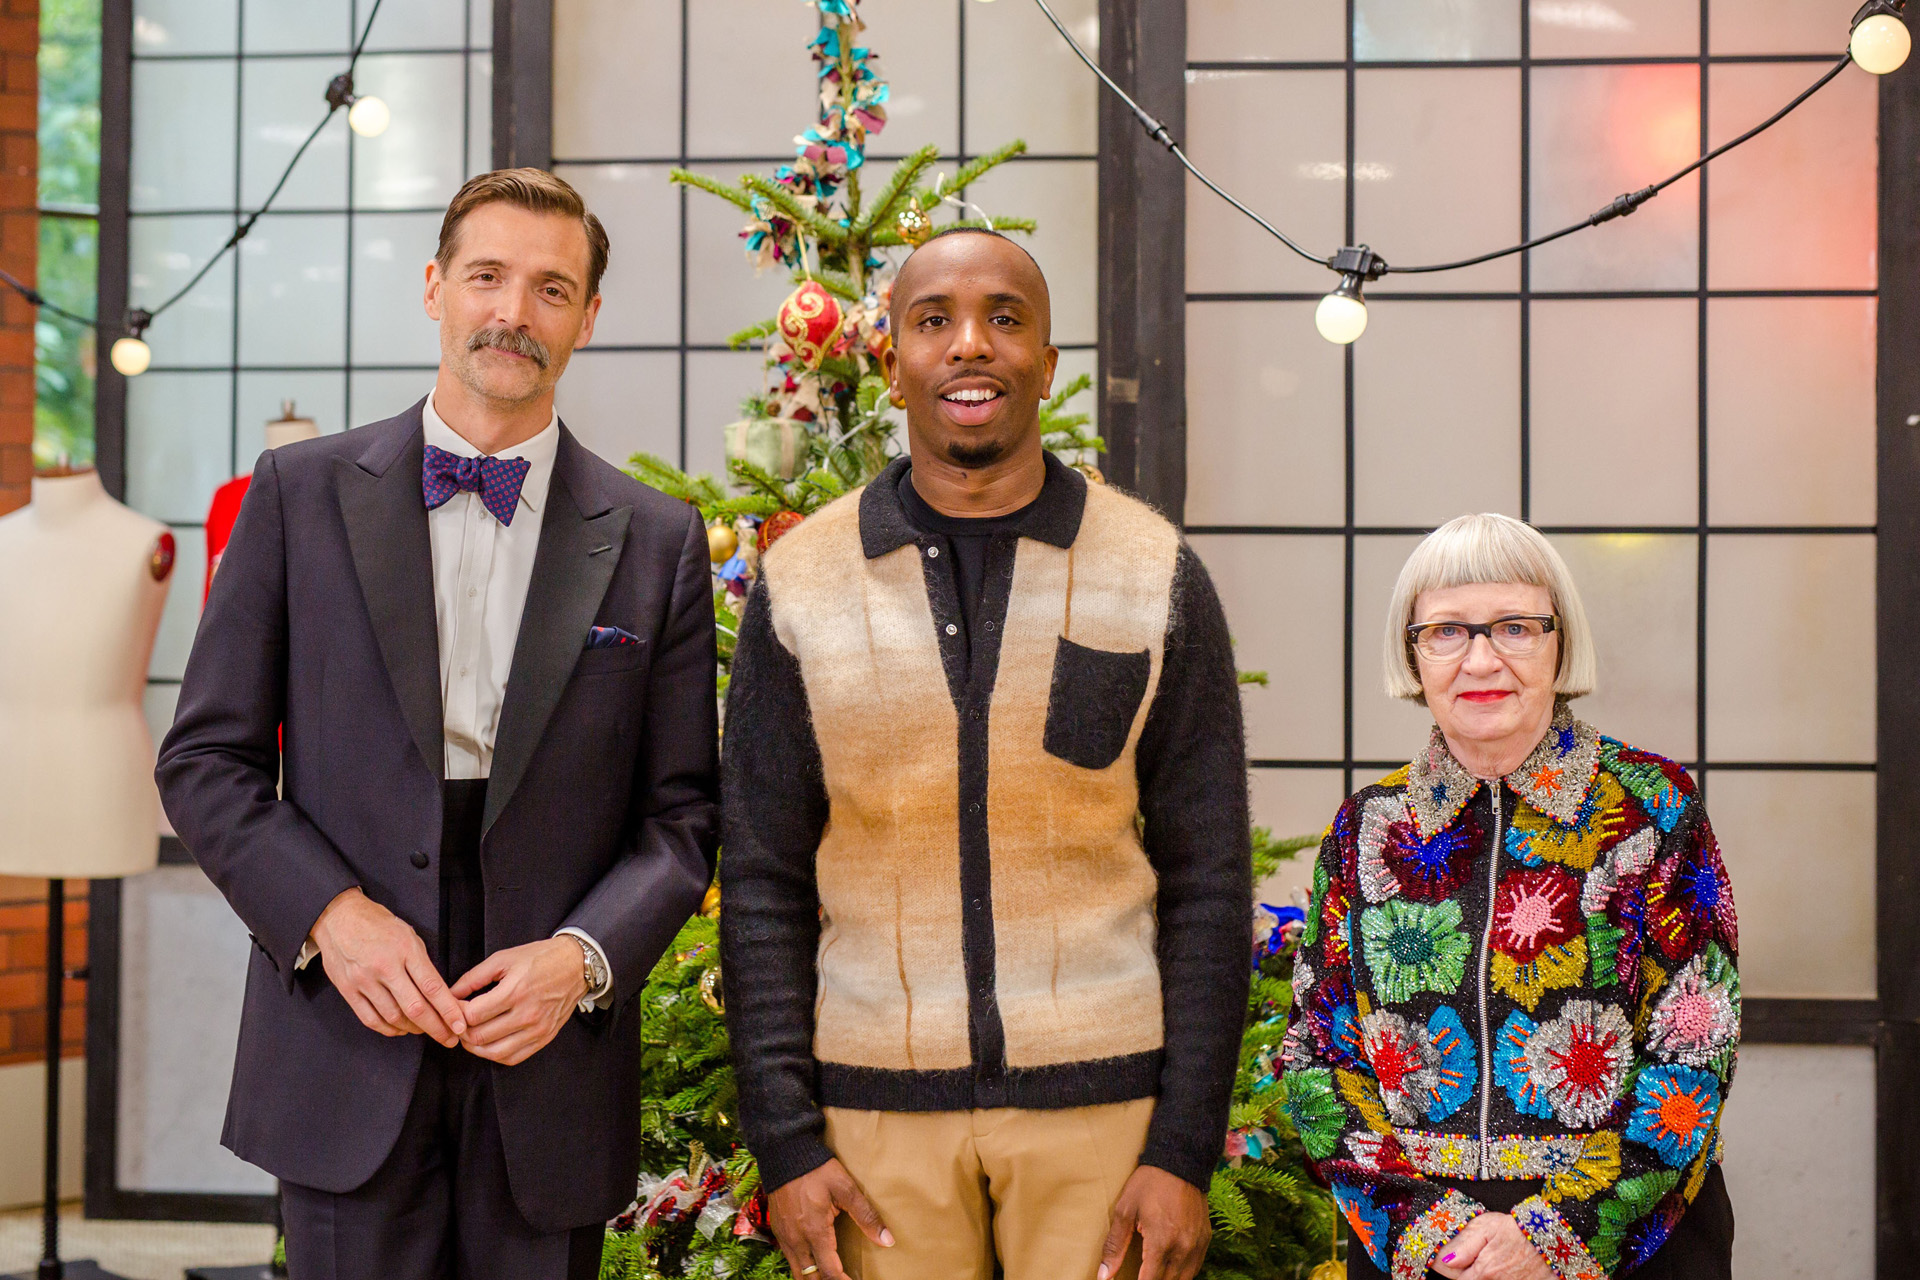 When Is The Great British Sewing Bee Back On TV?